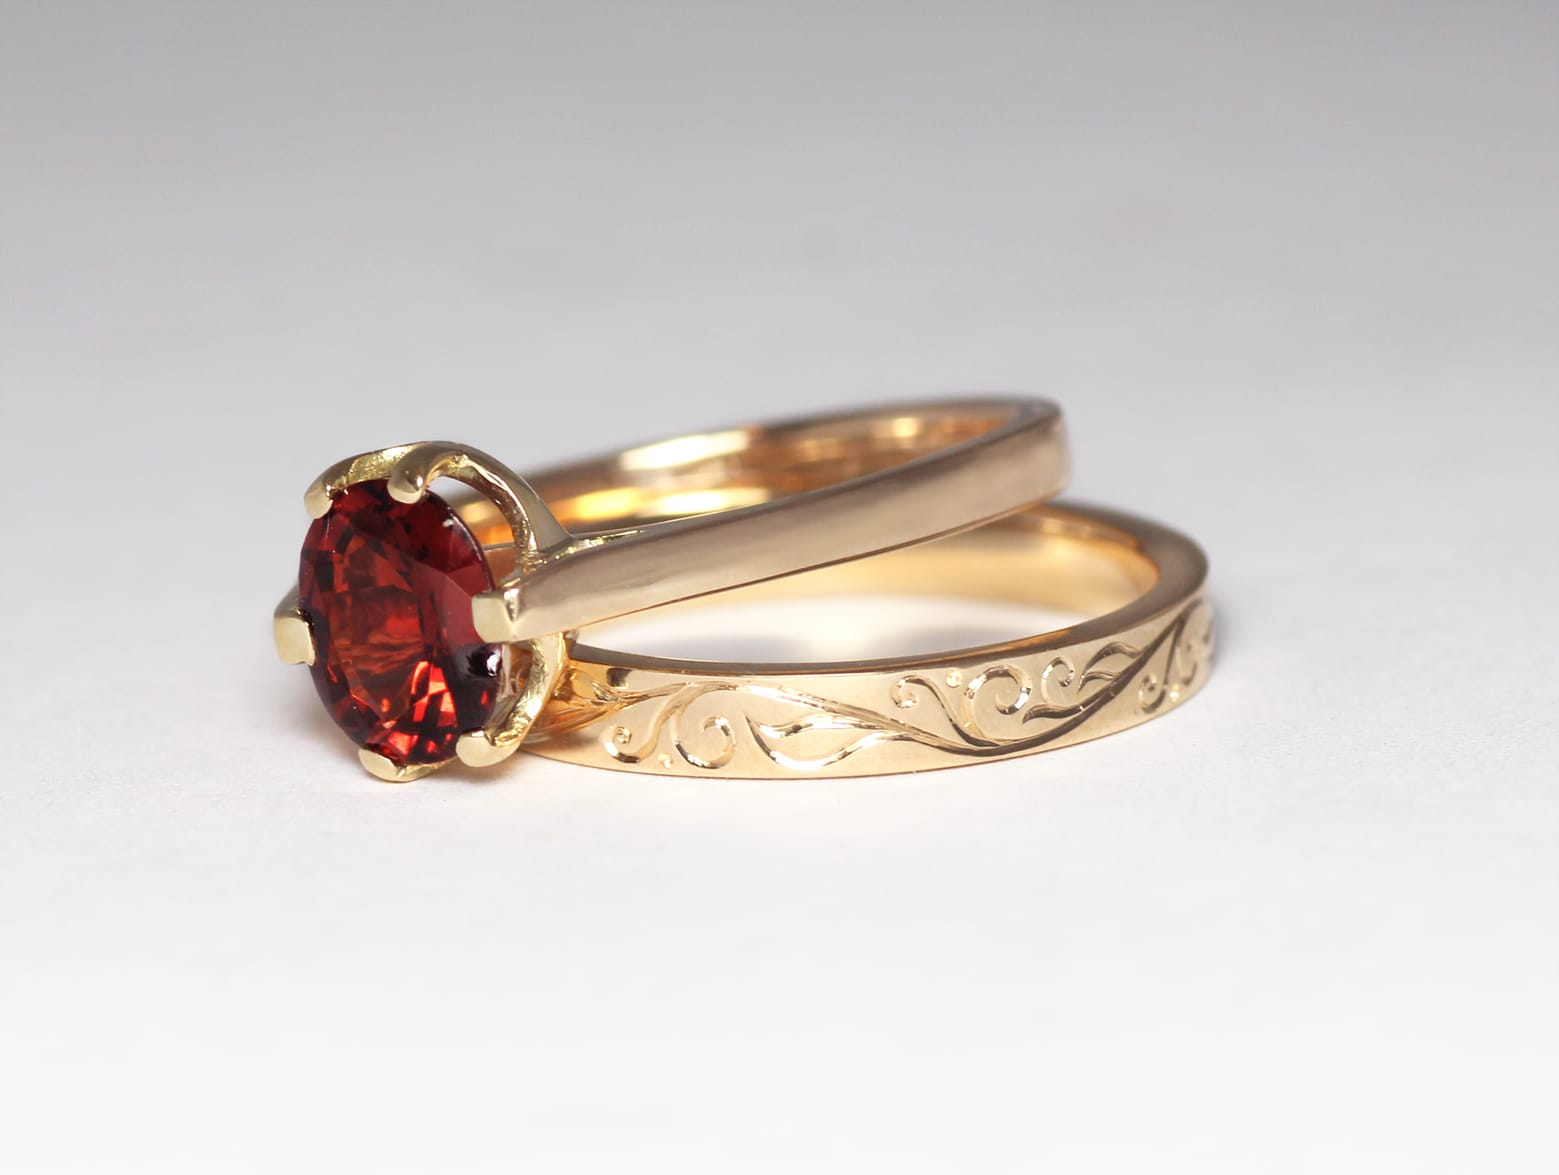 Recycled gold with engraving and ruby by Zoe Pook Jewellery